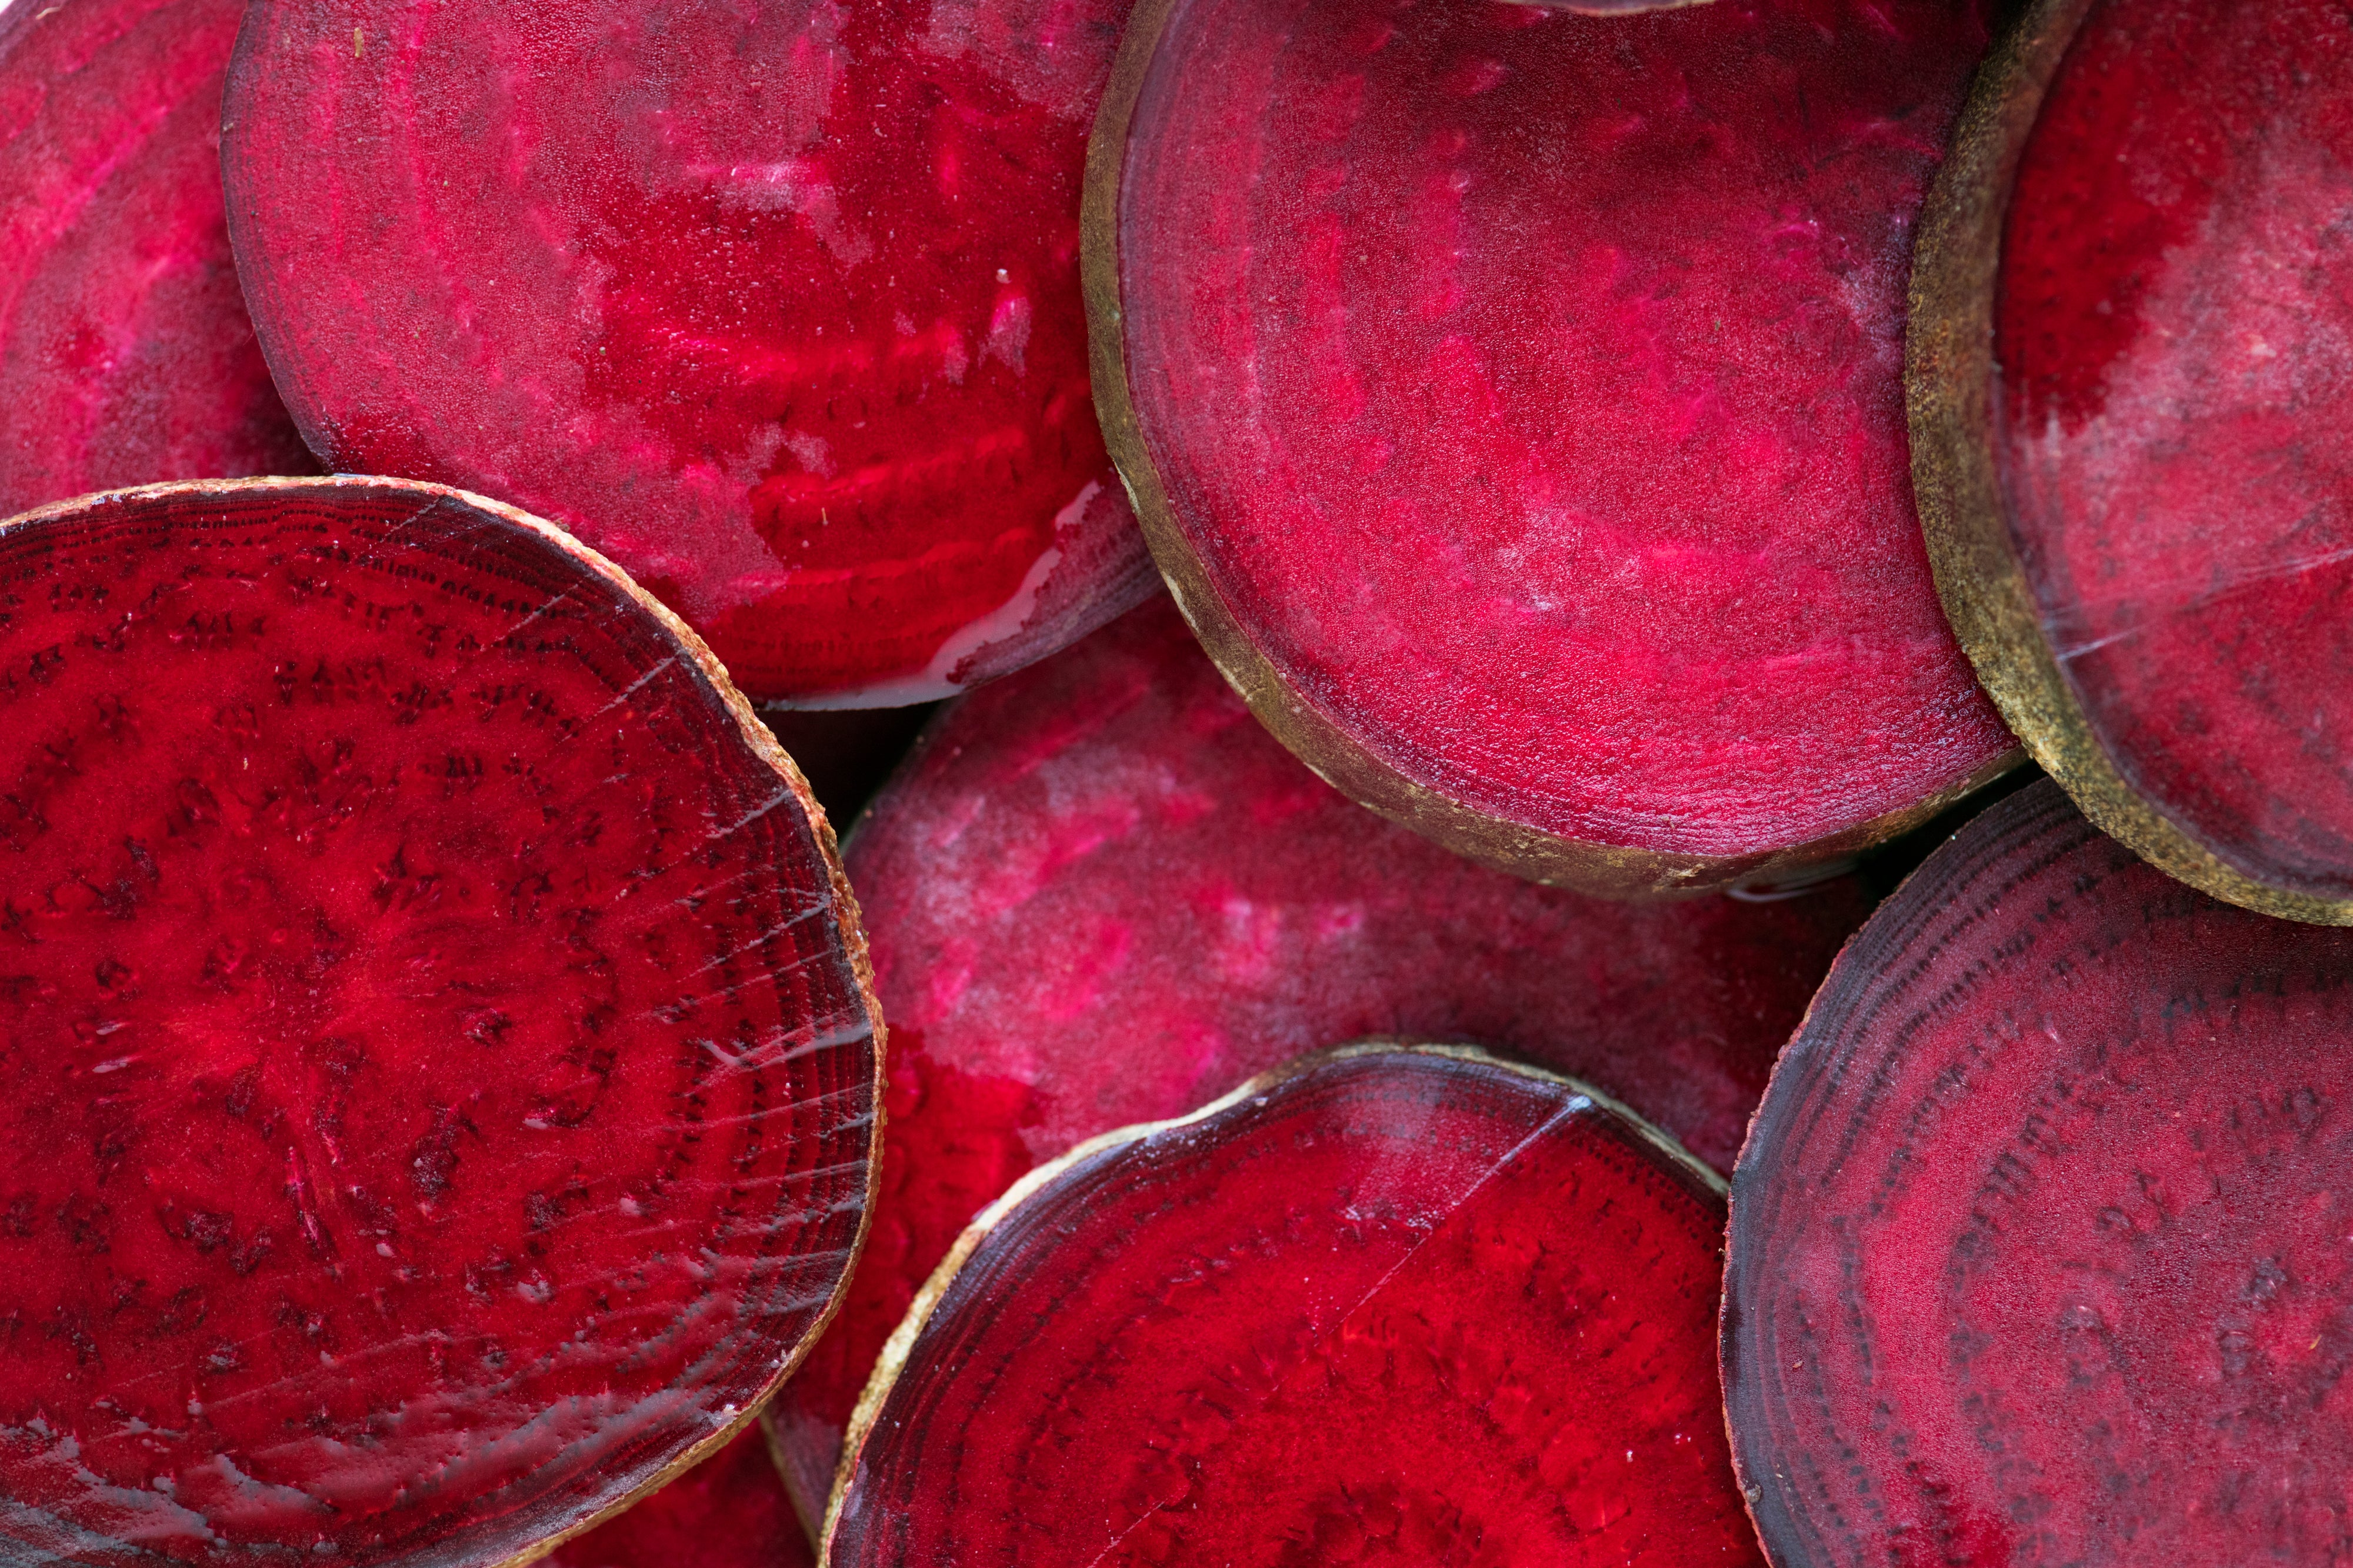 What Happens When You Eat Beets?